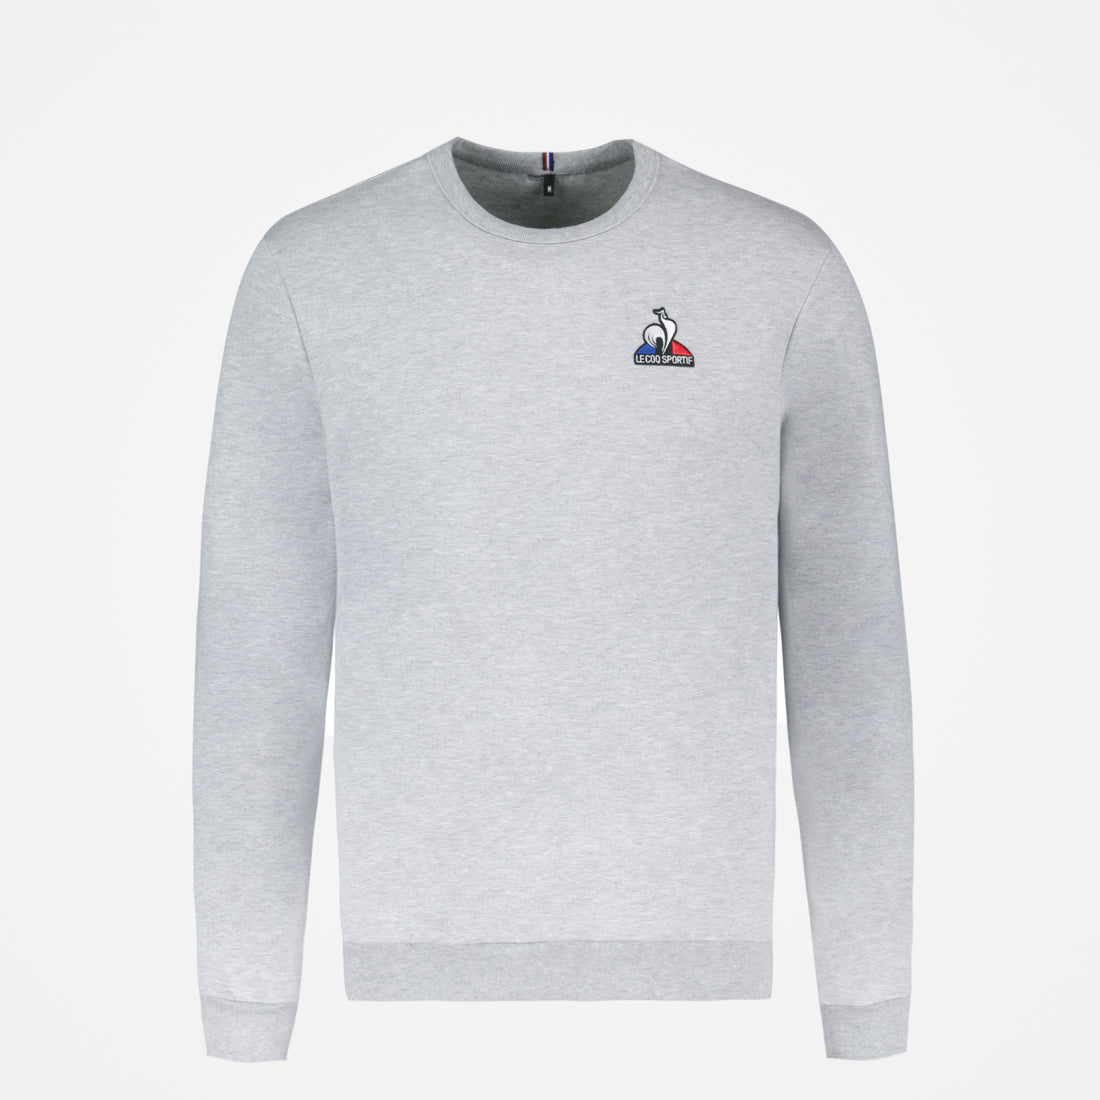 2310559-ESS Crew Sweat N°4 M gris chiné clair | Sweat col rond Homme